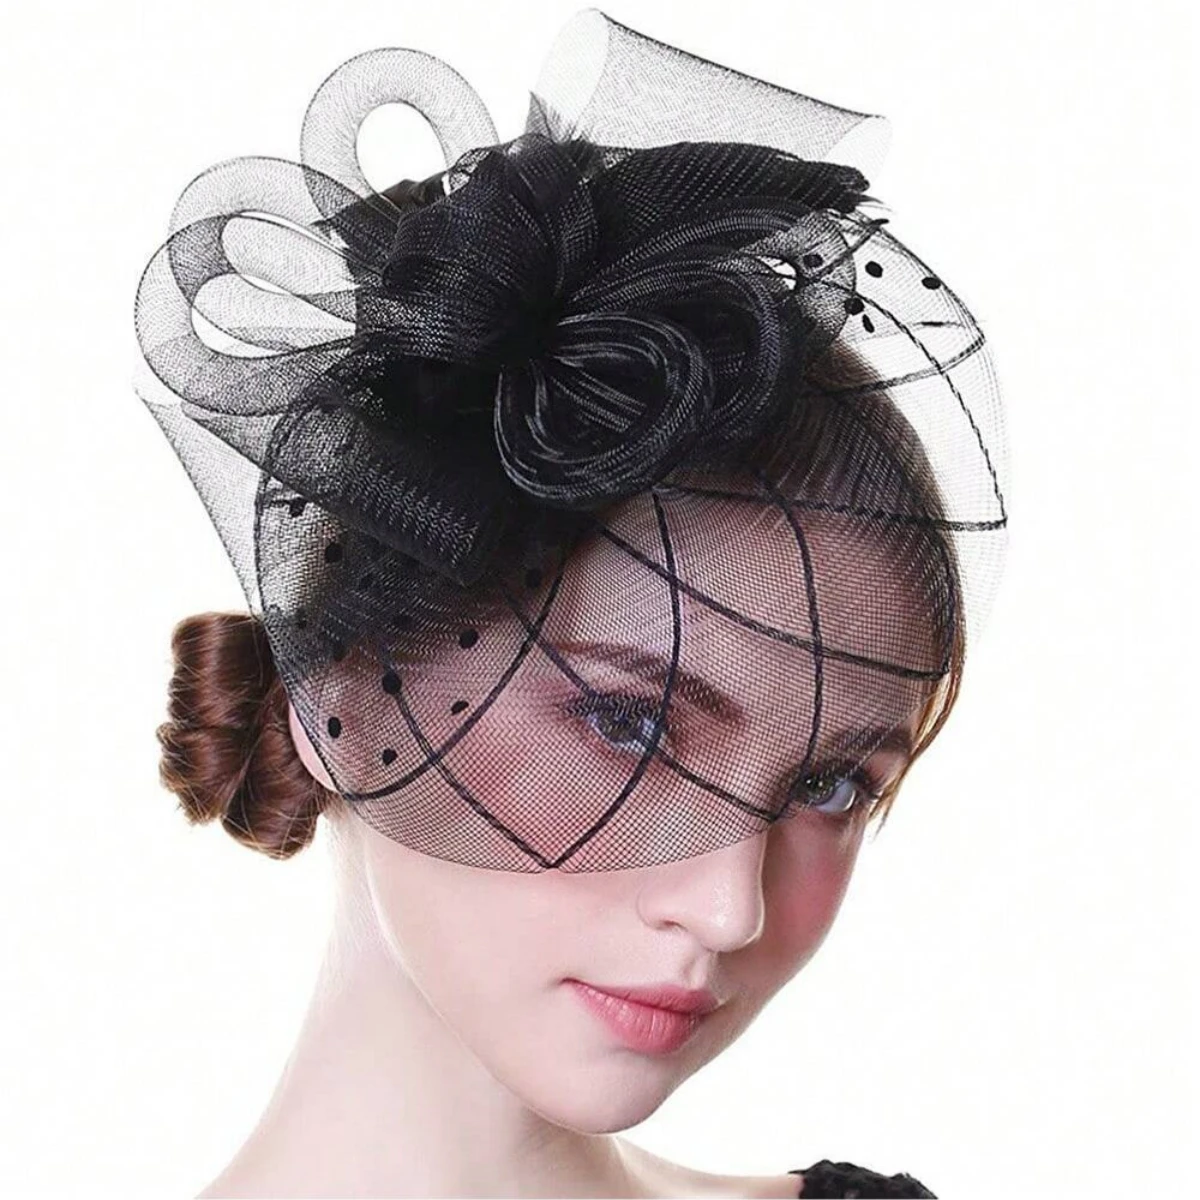 Women's Headwear Tea Party Church Wedding Mesh Cocktail Party Flower Feather Charming Clip Christmas Party Hair Accessories New 100pcs love small yarn bag christmas gift bag candy bag wedding gift bag jewelry packing bag storage bag organza mesh bag